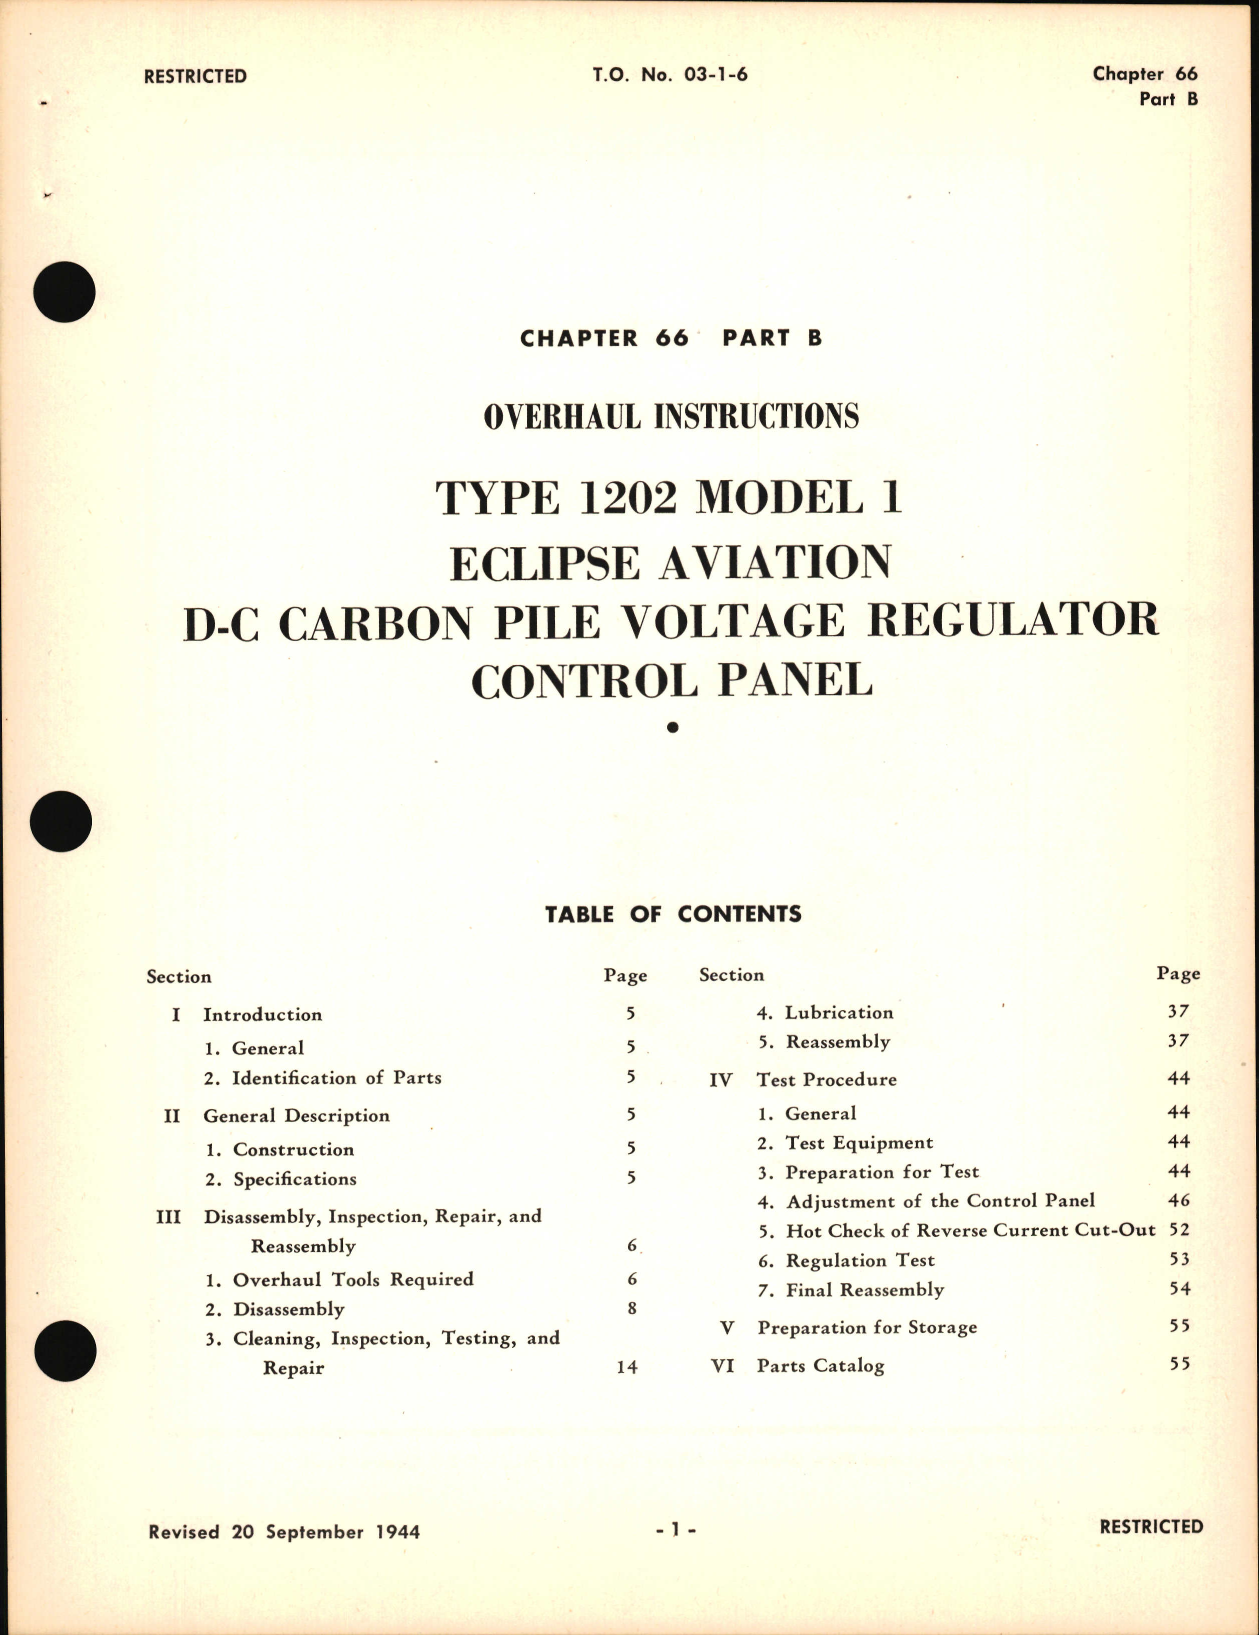 Sample page 1 from AirCorps Library document: Overhaul Instructions for D-C Carbon Pile Voltage Regulator Control Panel